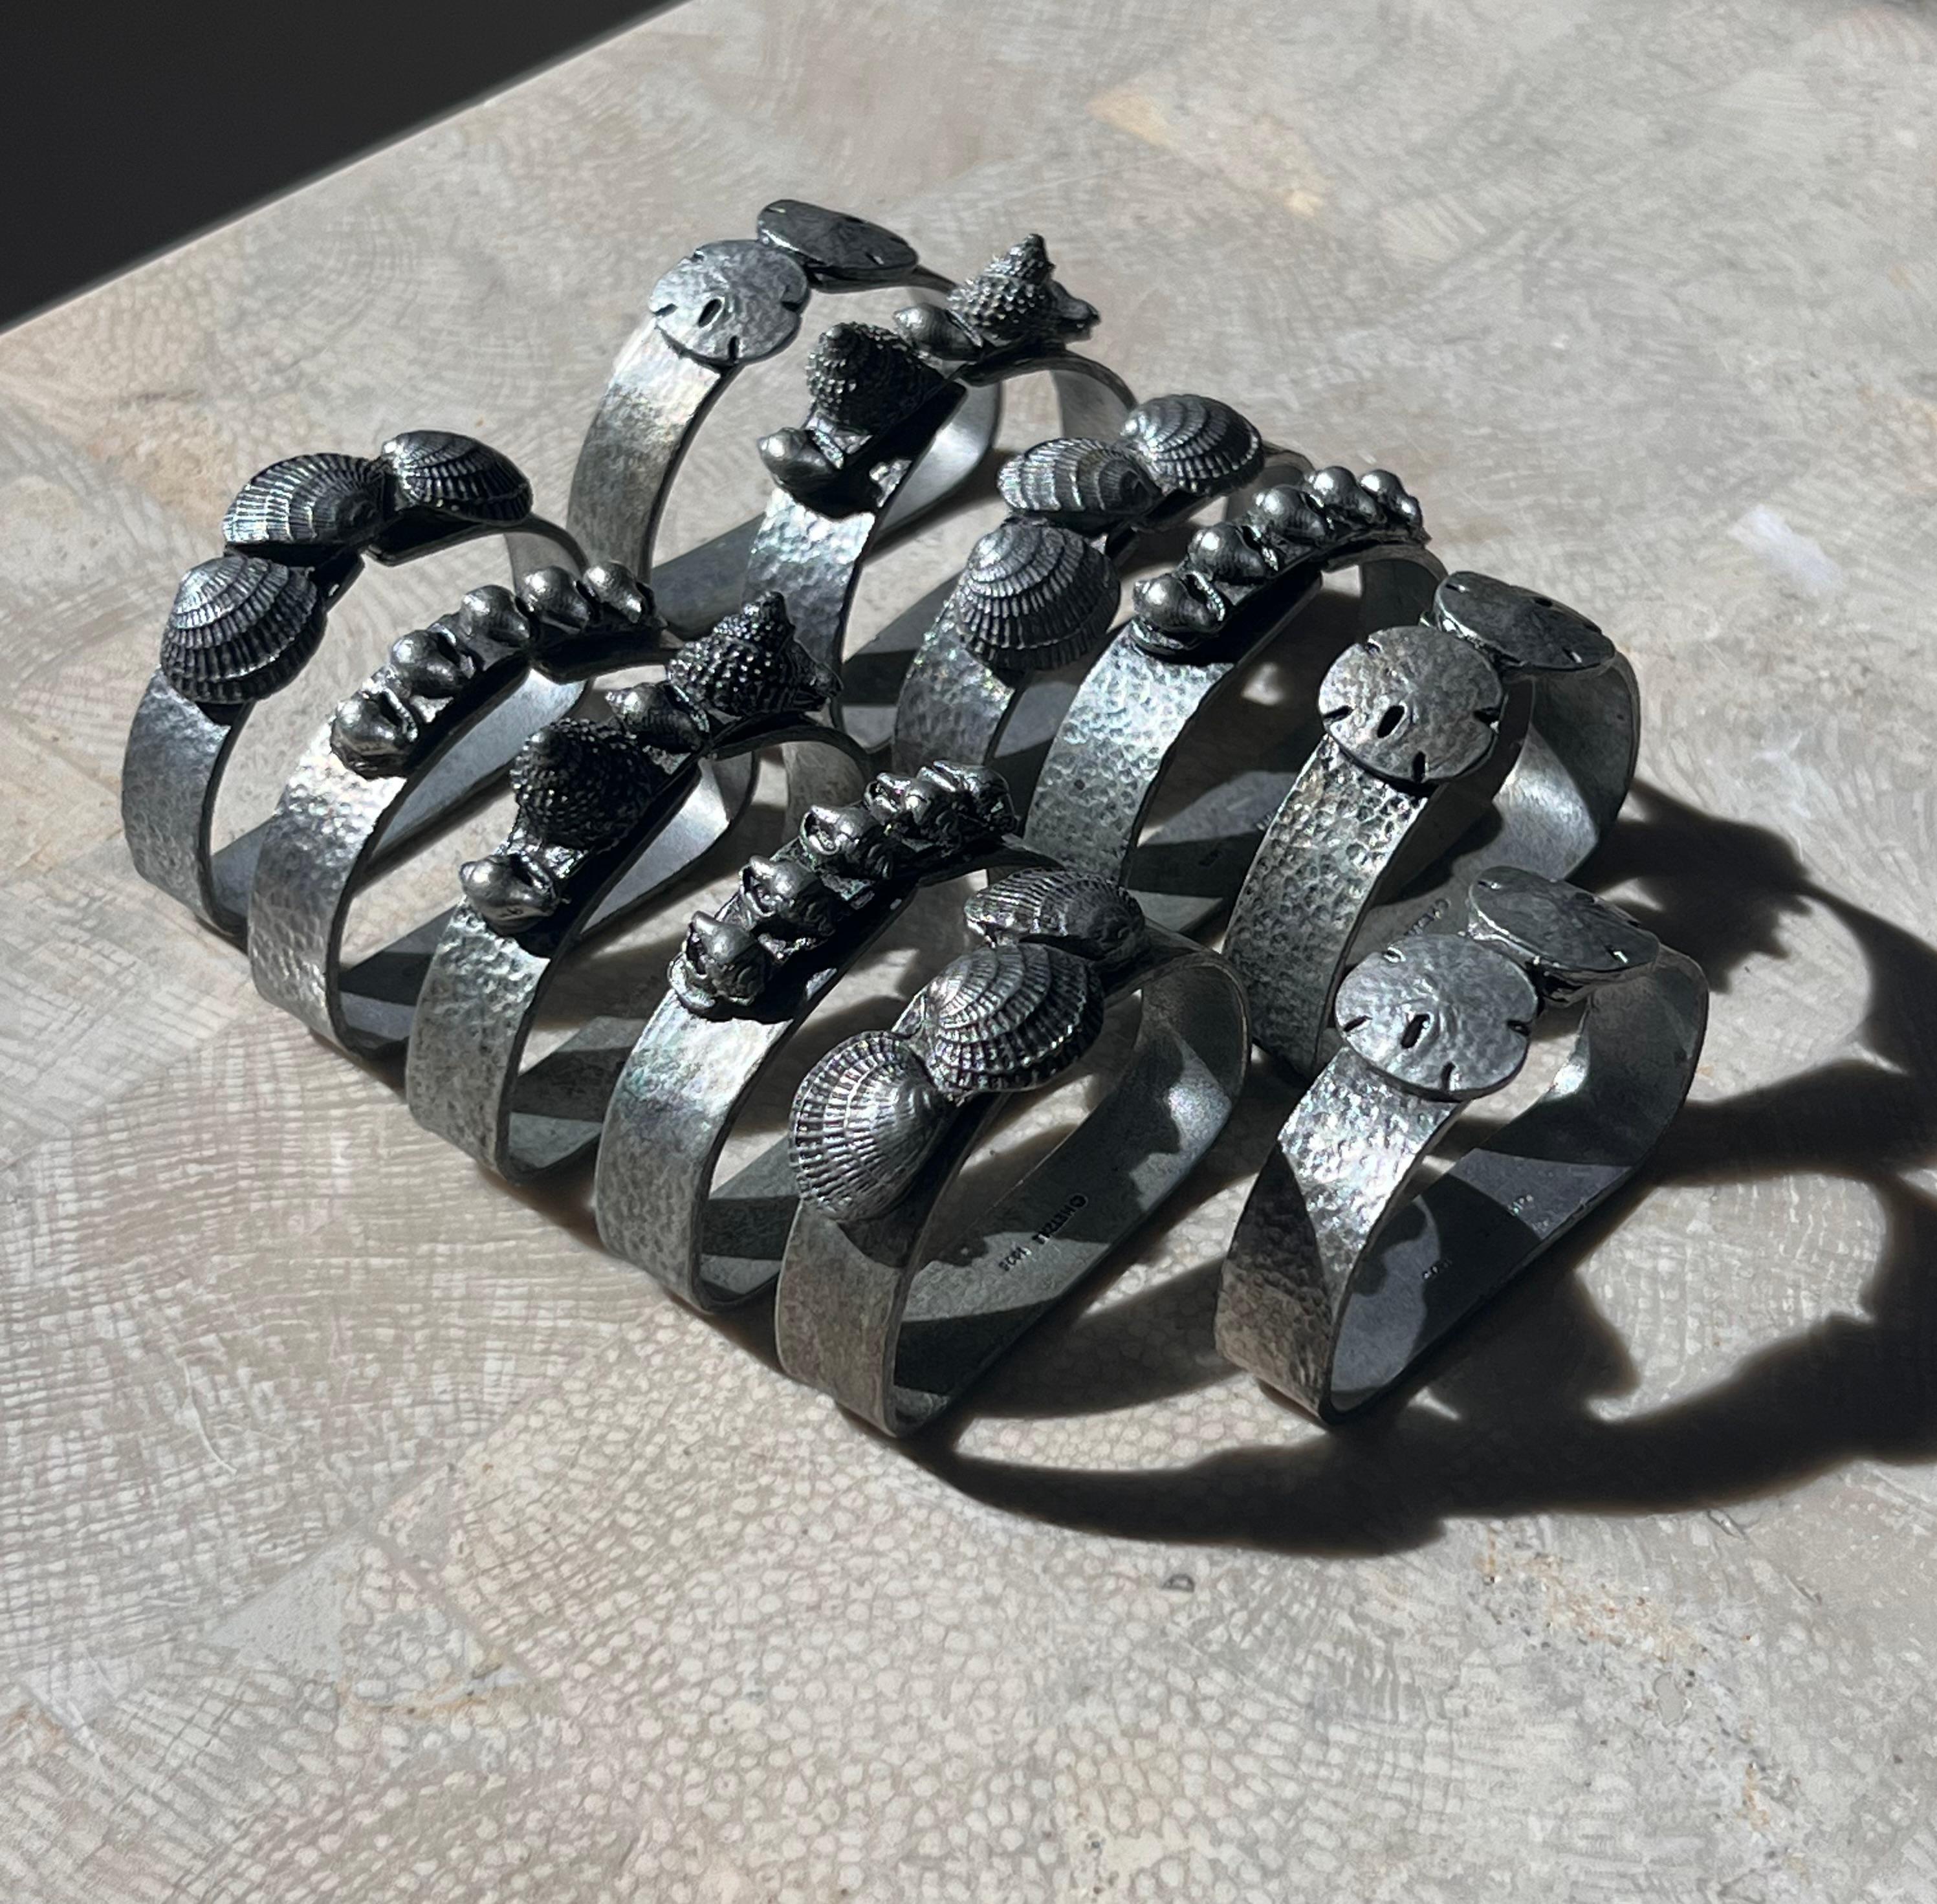 A set of 11 pewter napkin rings ft shells and sand-dollars, 1975. Pick up in central west Los Angeles or we ship worldwide.
Each ring measures approx 2.25” W x .45” D x 1.75” H 